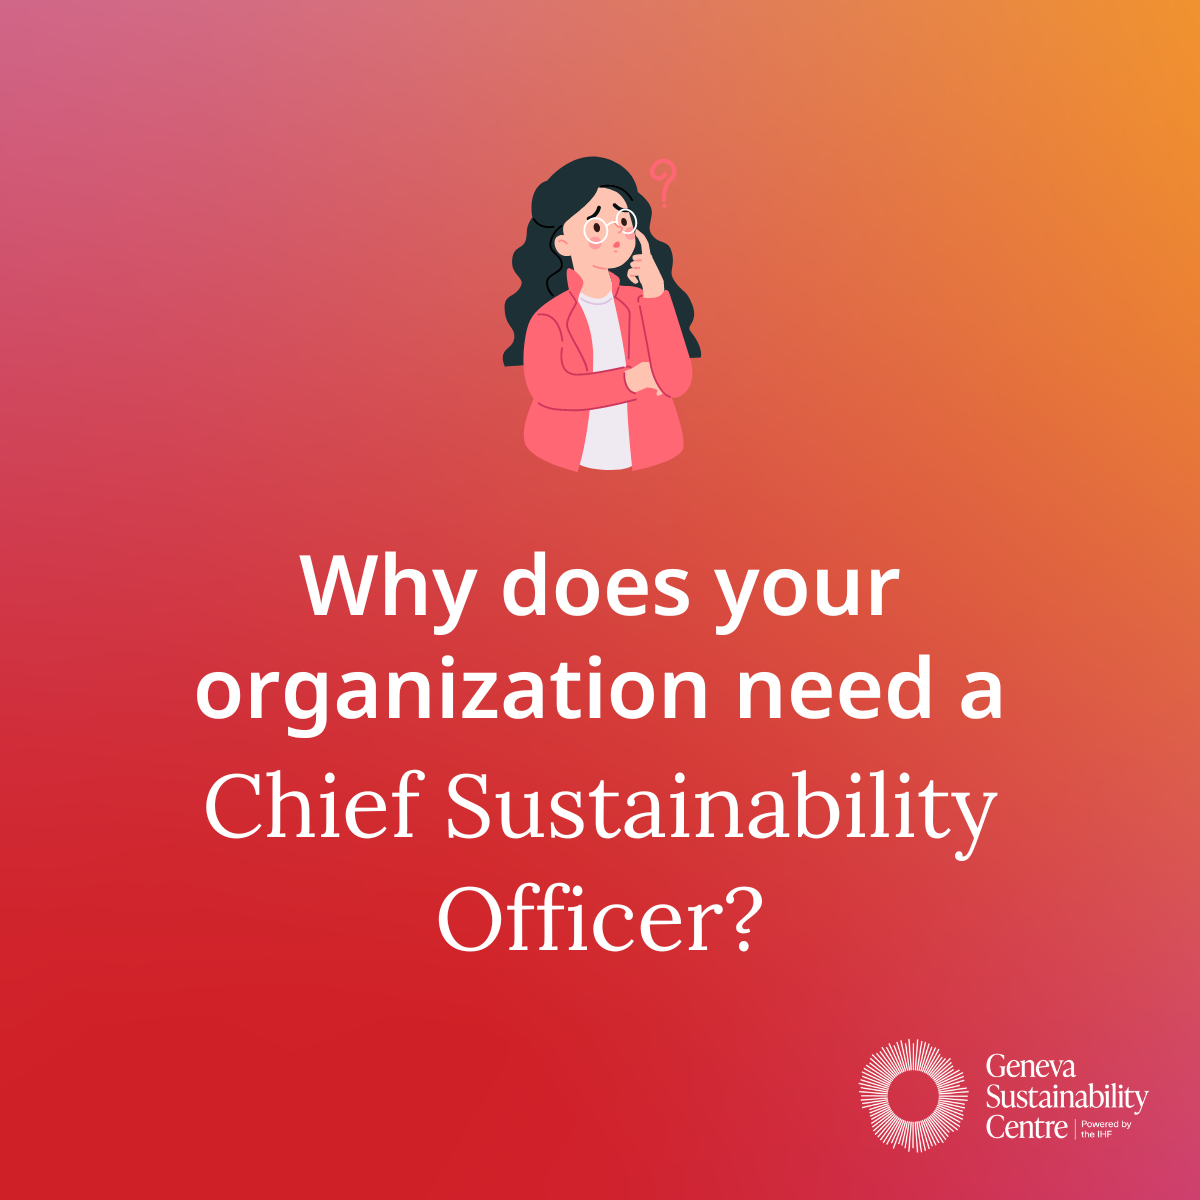 Why does your organization need a Chief Sustainability Officer